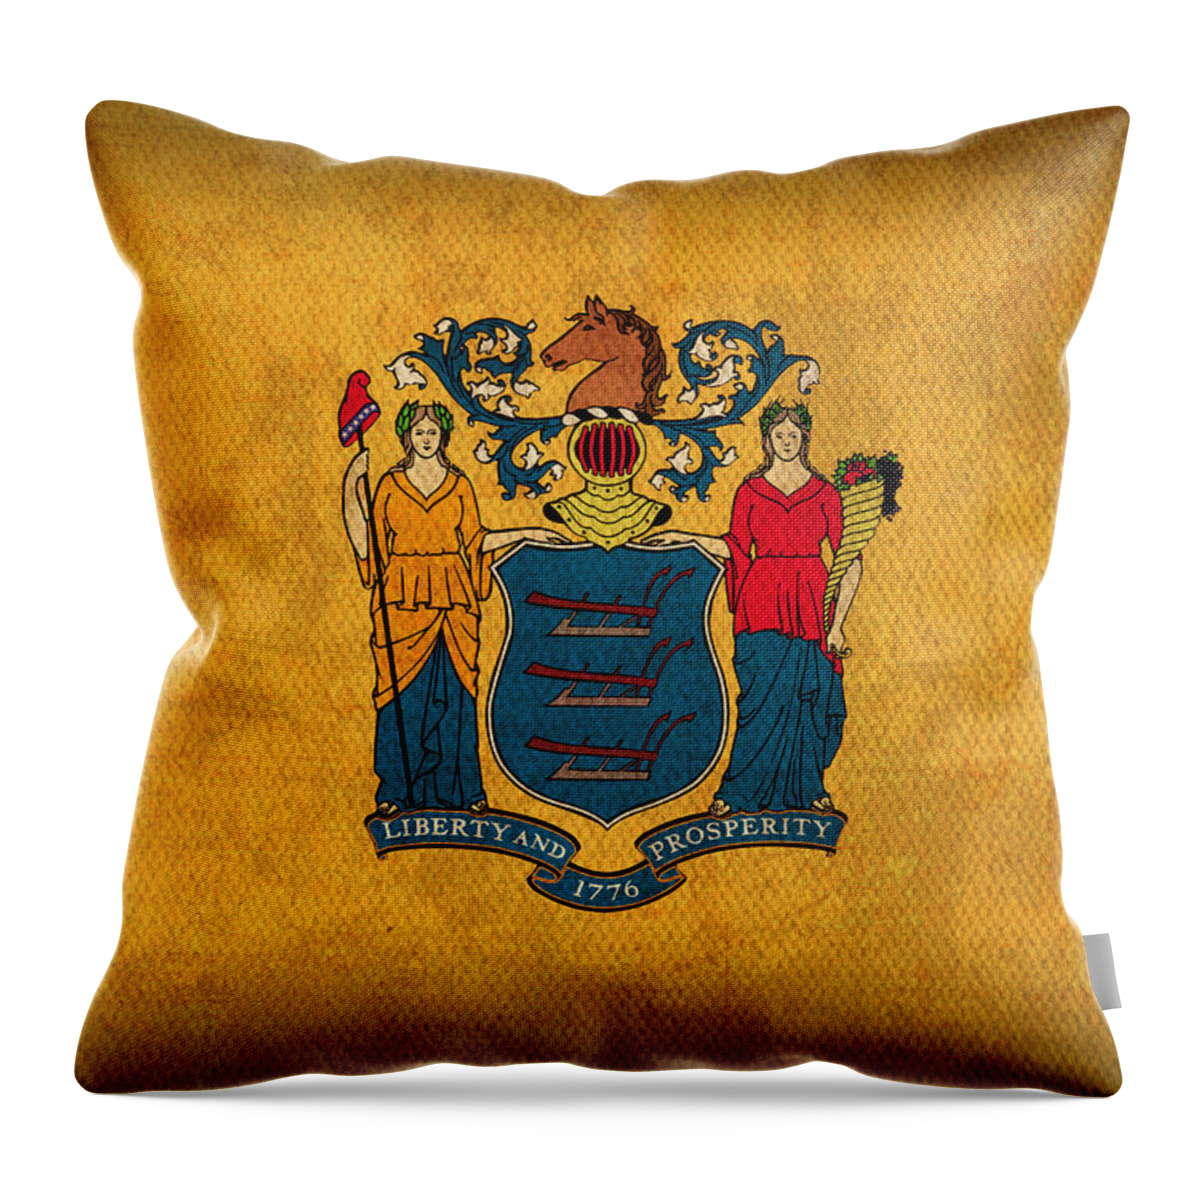 New Jersey State Flag Art On Worn Canvas Hoboken Pasaic Trenton Elizabeth City Patterson Throw Pillow featuring the mixed media New Jersey State Flag Art on Worn Canvas by Design Turnpike